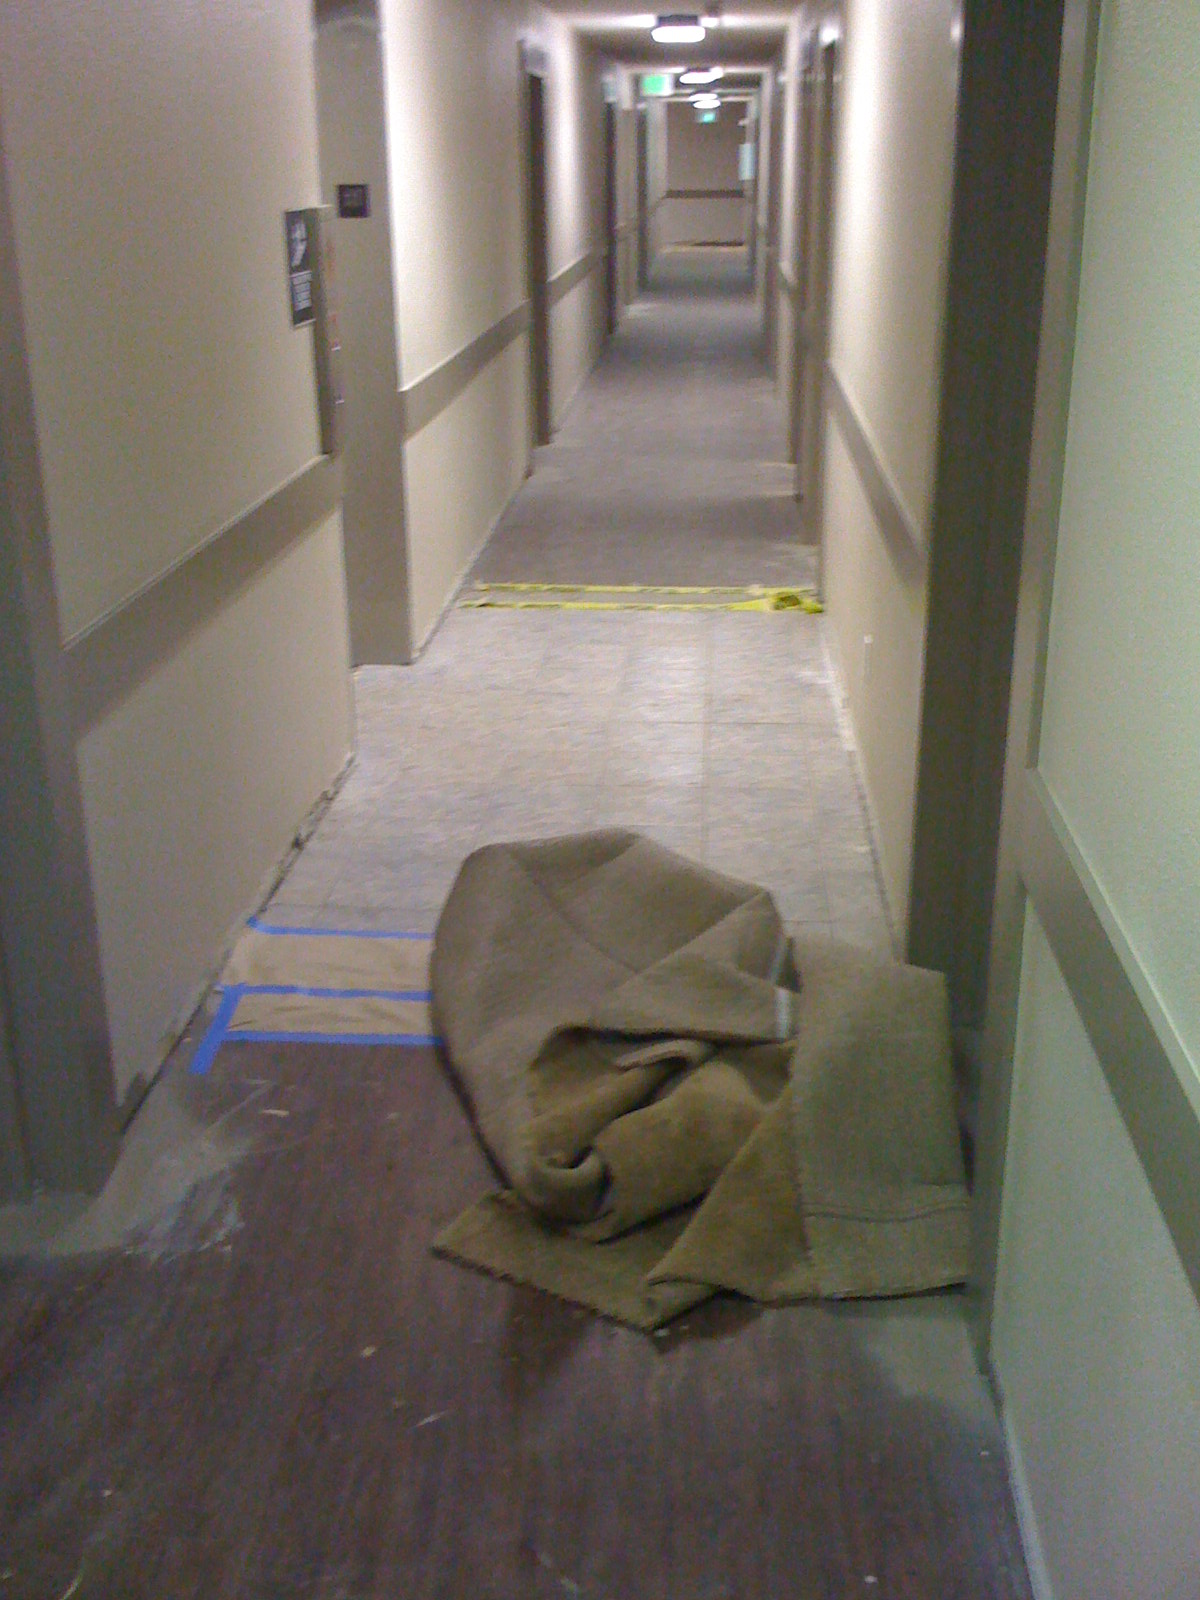 This mess was left in front of the elevator on the ground lavel all weekend.